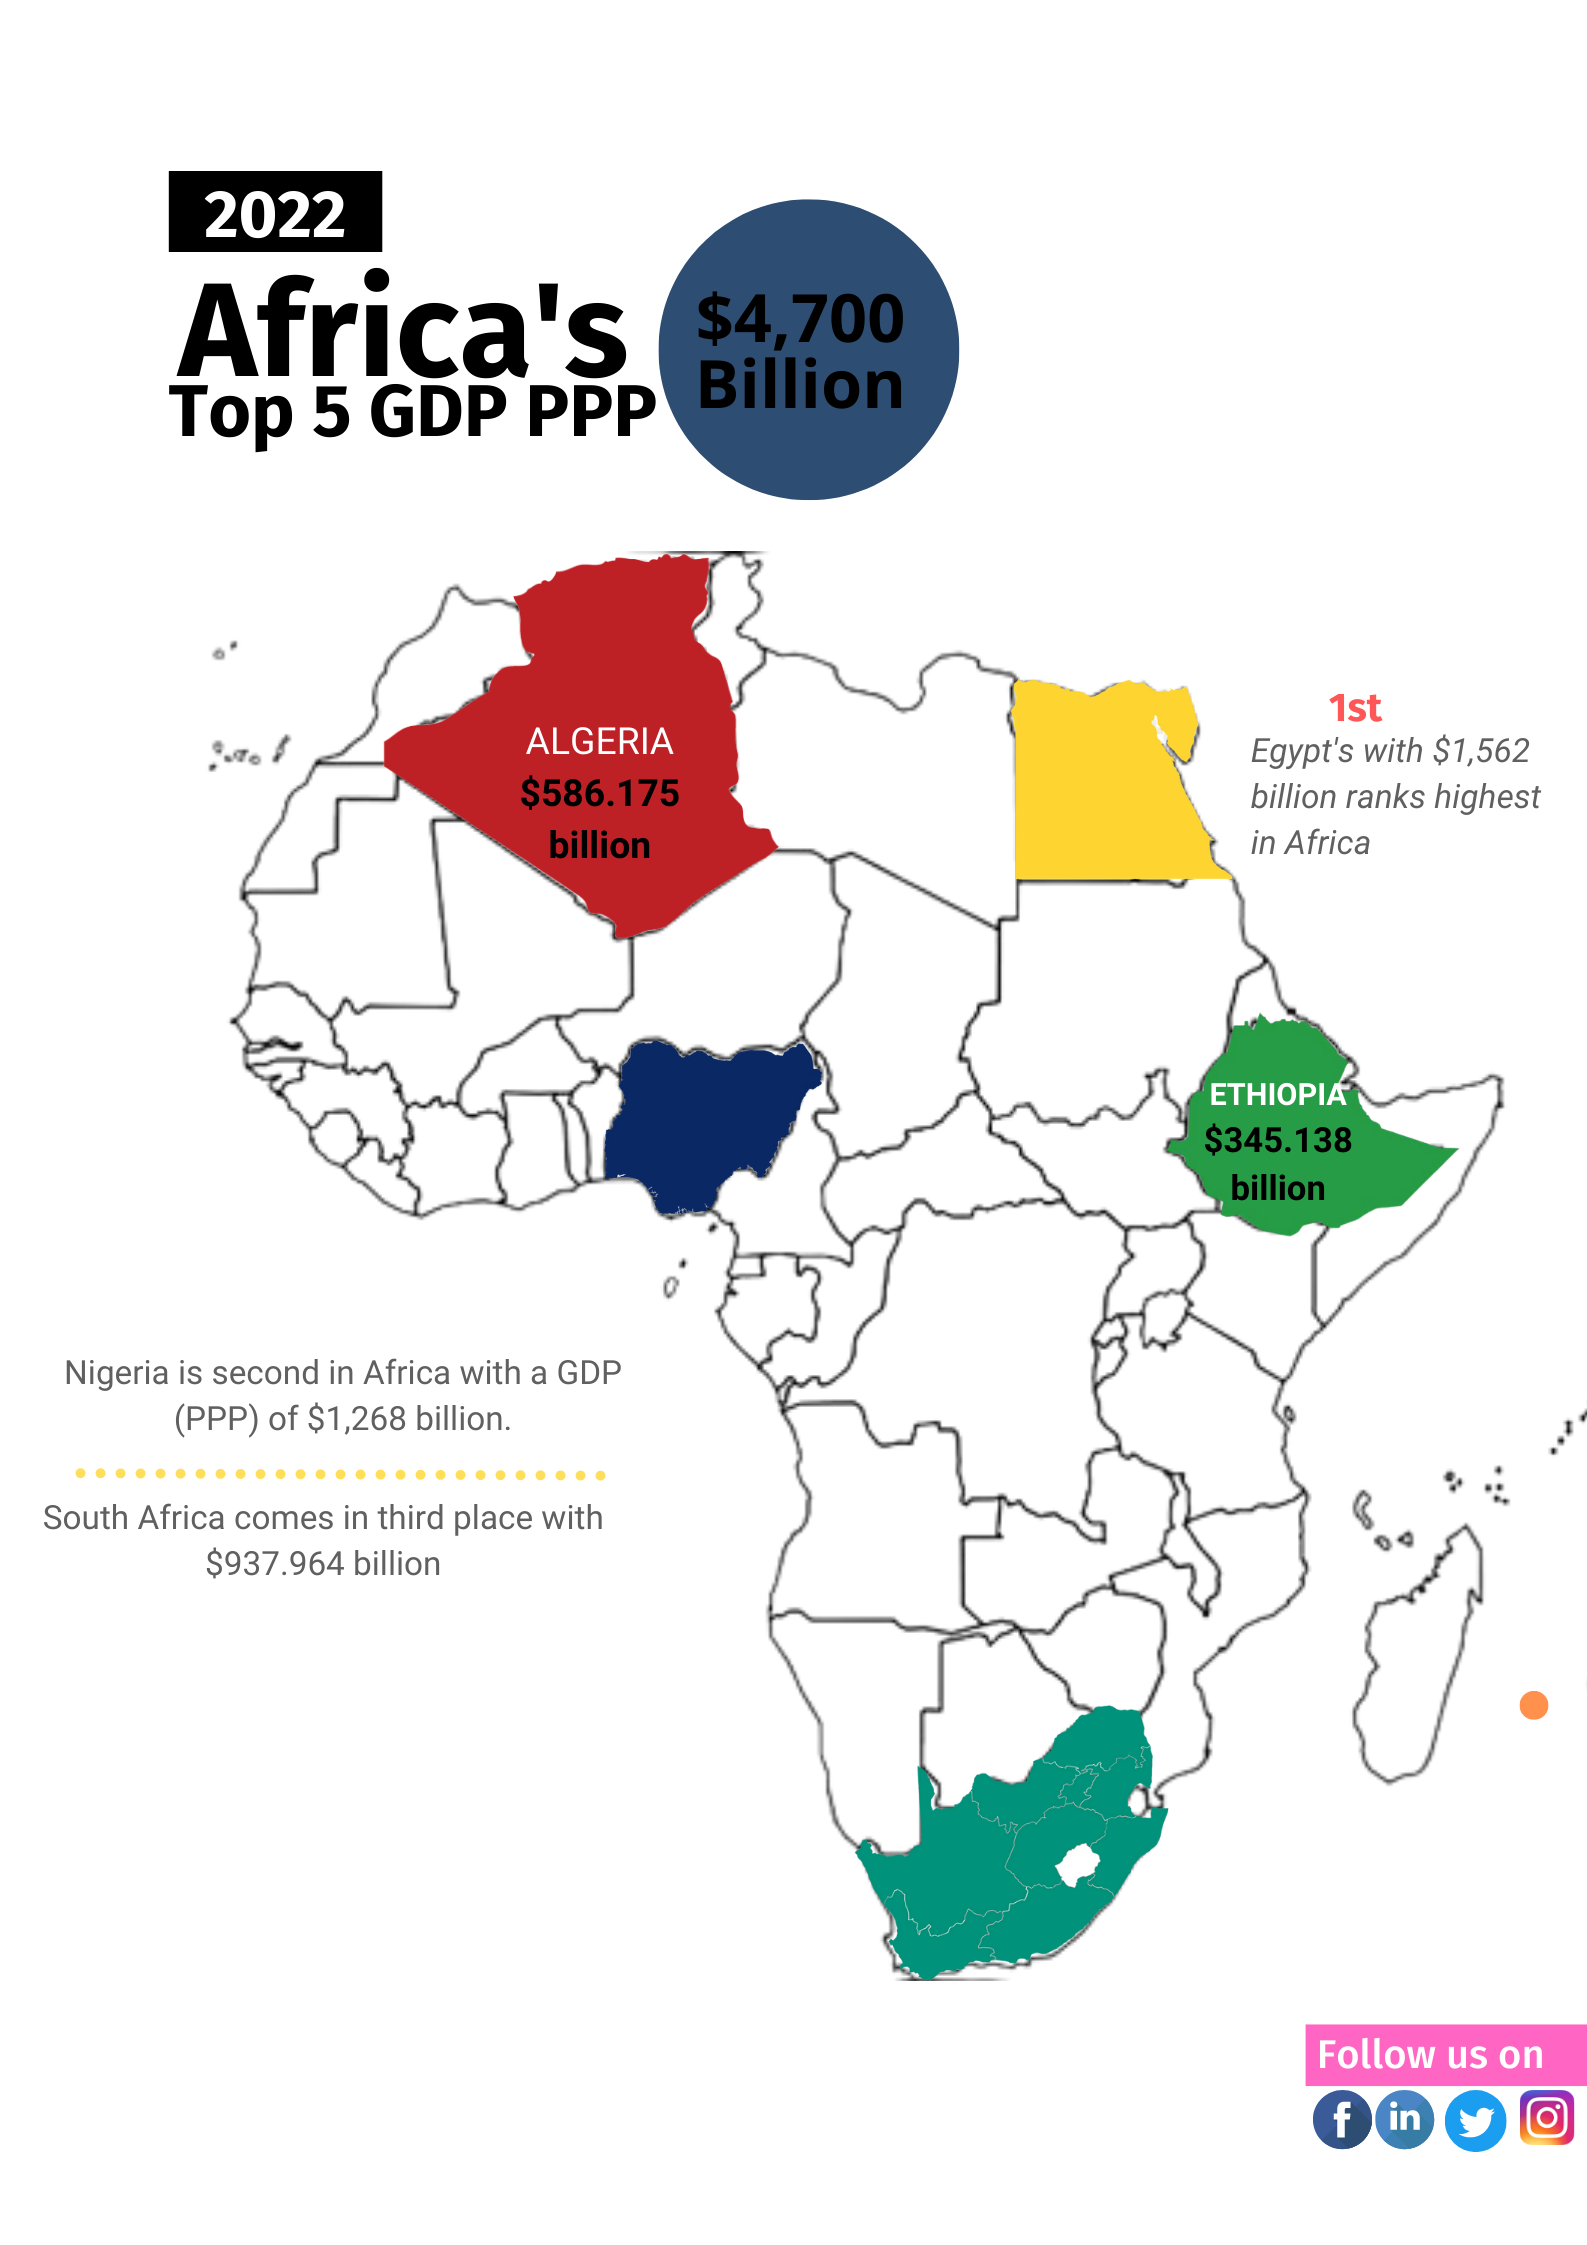 2022 Africa's Top 5 GDP PPP